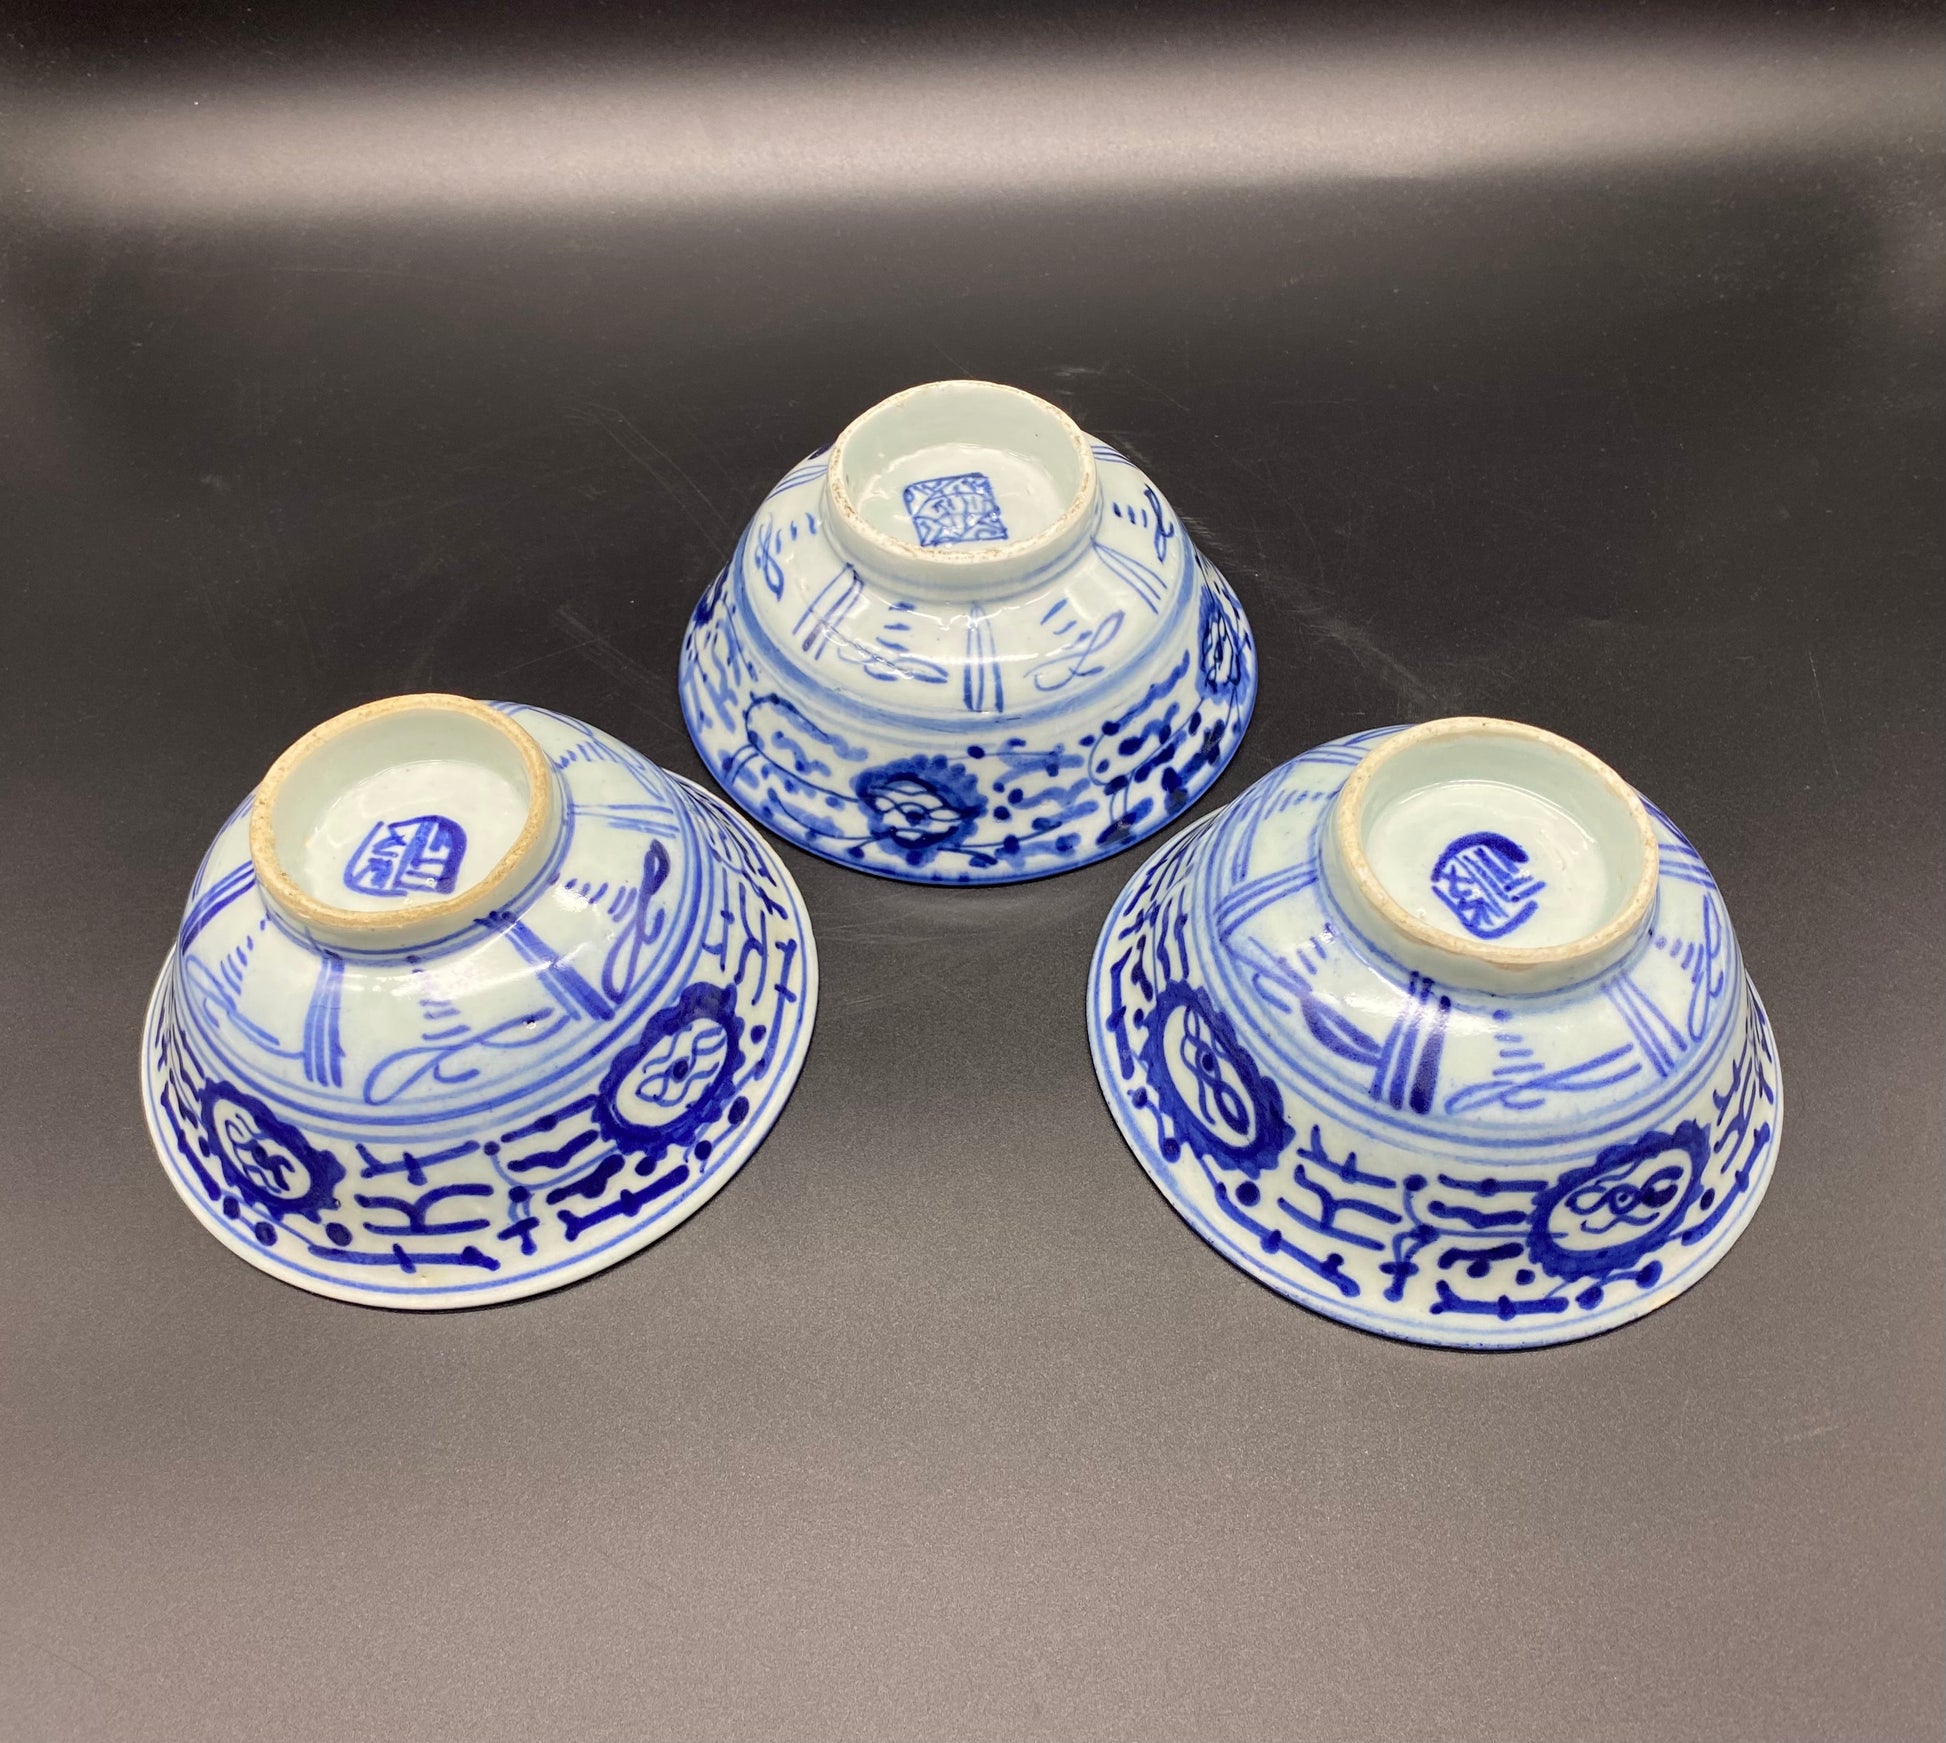 Antique Chinese Porcelain - Three Chinese Provencal Blue & White Qing Porcelain Bowls 18th Century 